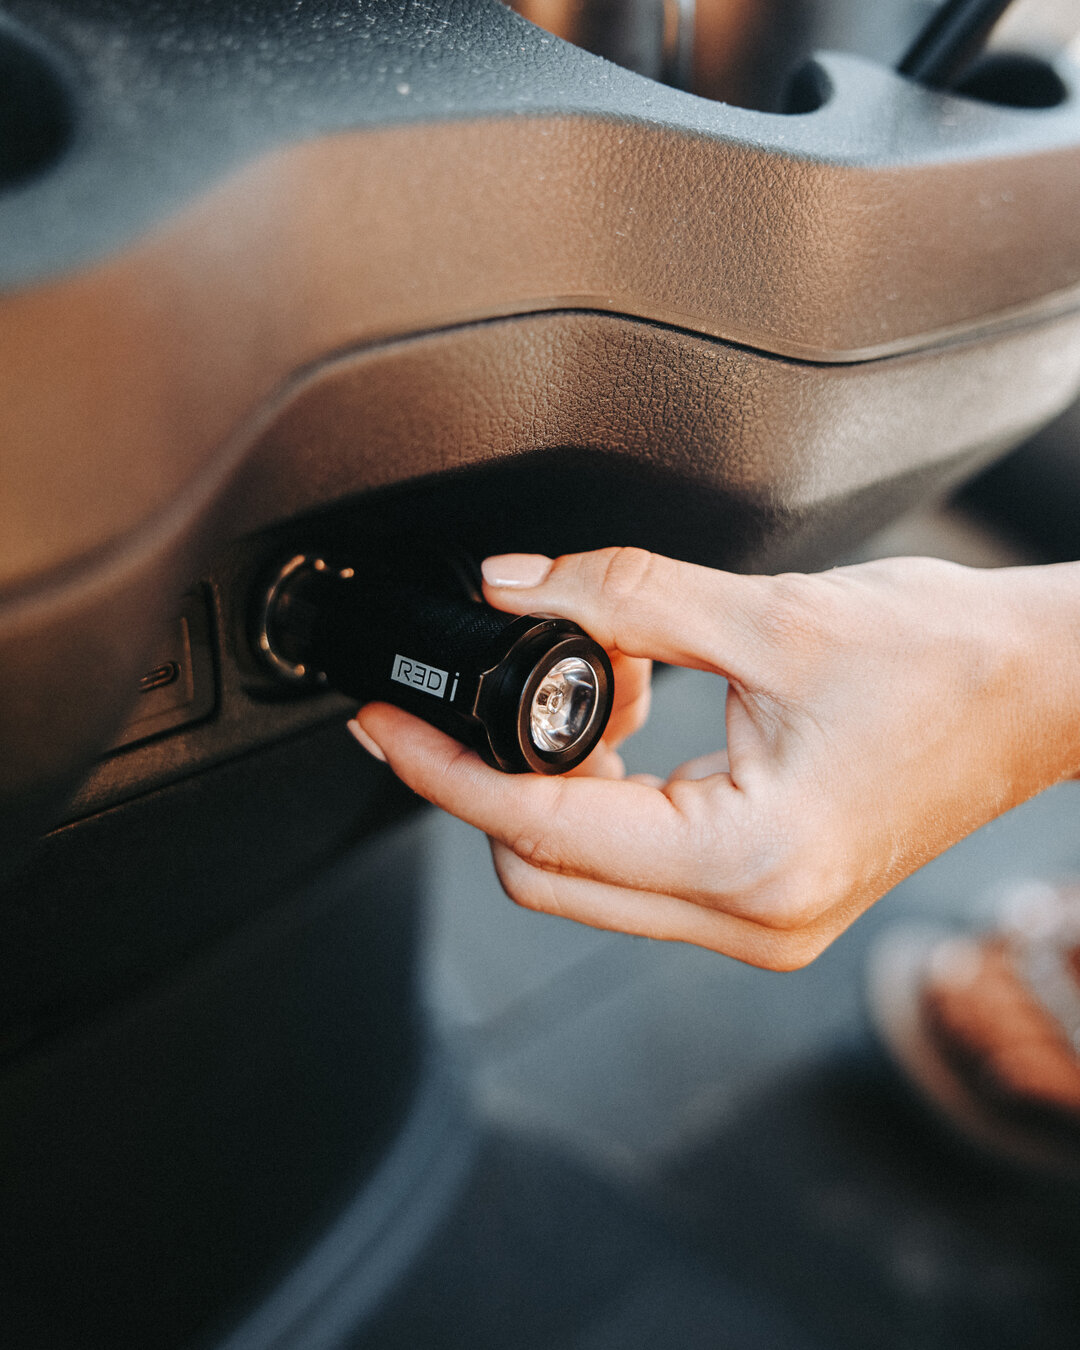 An absolute must-have in every car. Provides an extra charging port for the passenger, a seatbelt cutter for the unexpected, and a flashlight for when you need it🔋⚔️🔦⠀⠀⠀⠀⠀⠀⠀⠀⠀
⠀⠀⠀⠀⠀⠀⠀⠀⠀
#wepowerwhatmovesyou #R3Di #R3DiAdventurer #SmartAdventurer #p